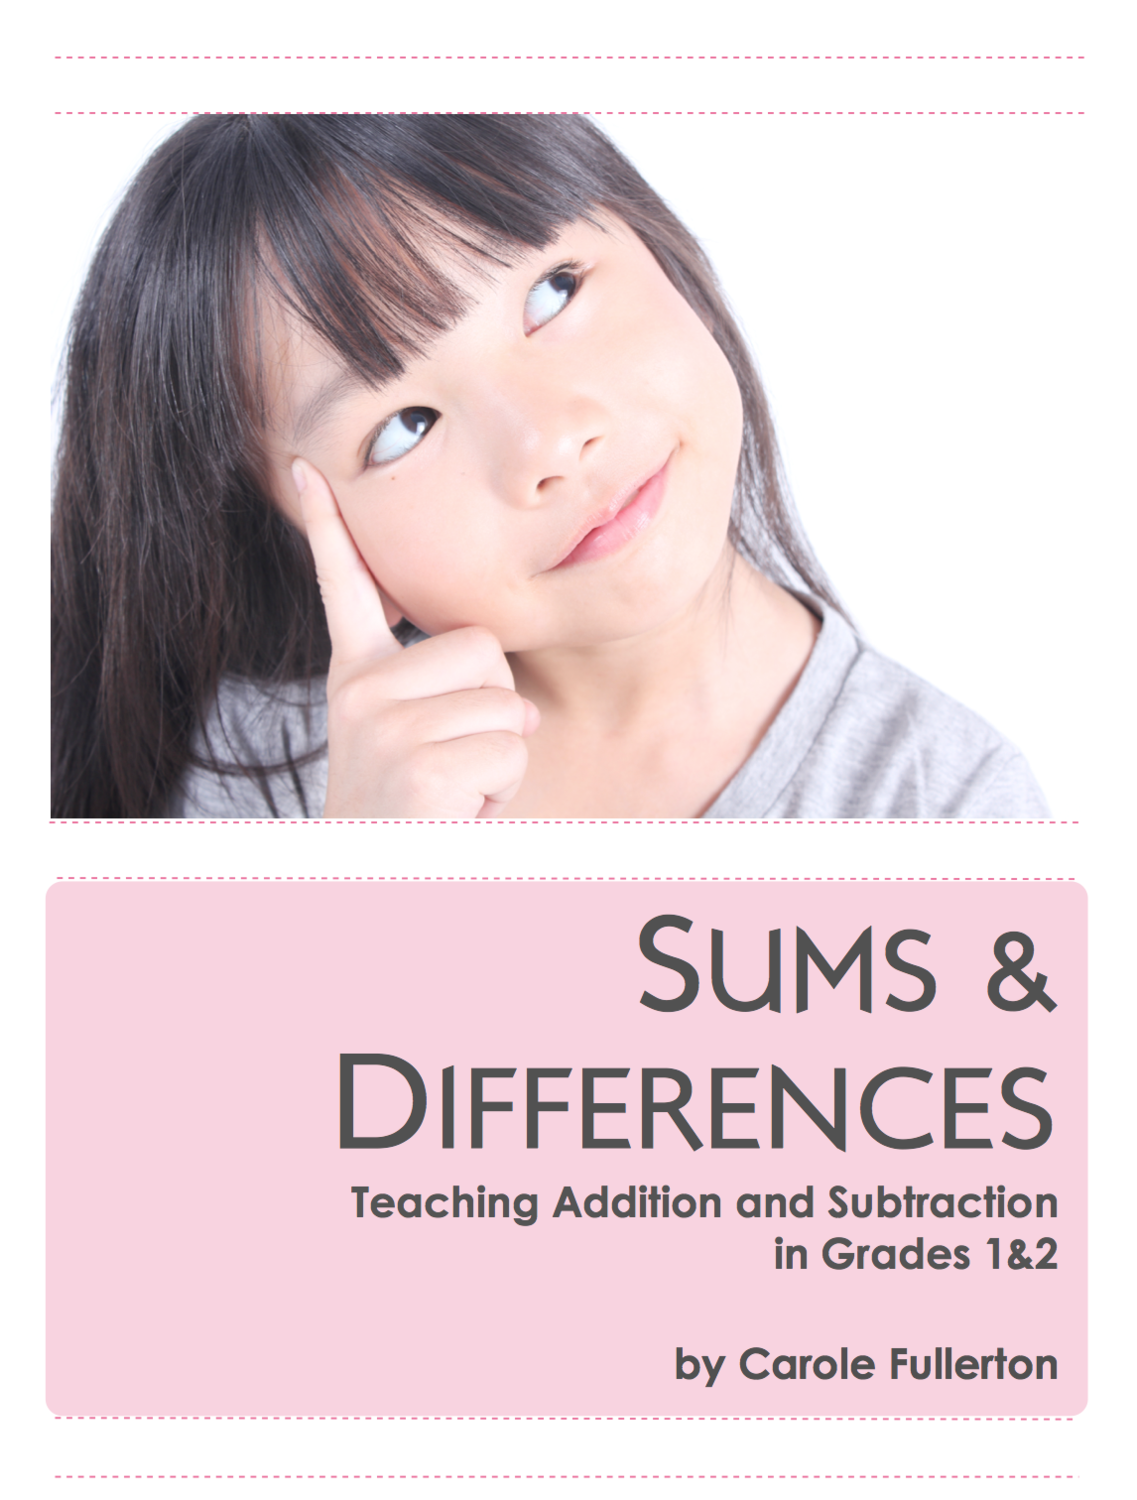 Sums and Differences for Grades 1&2